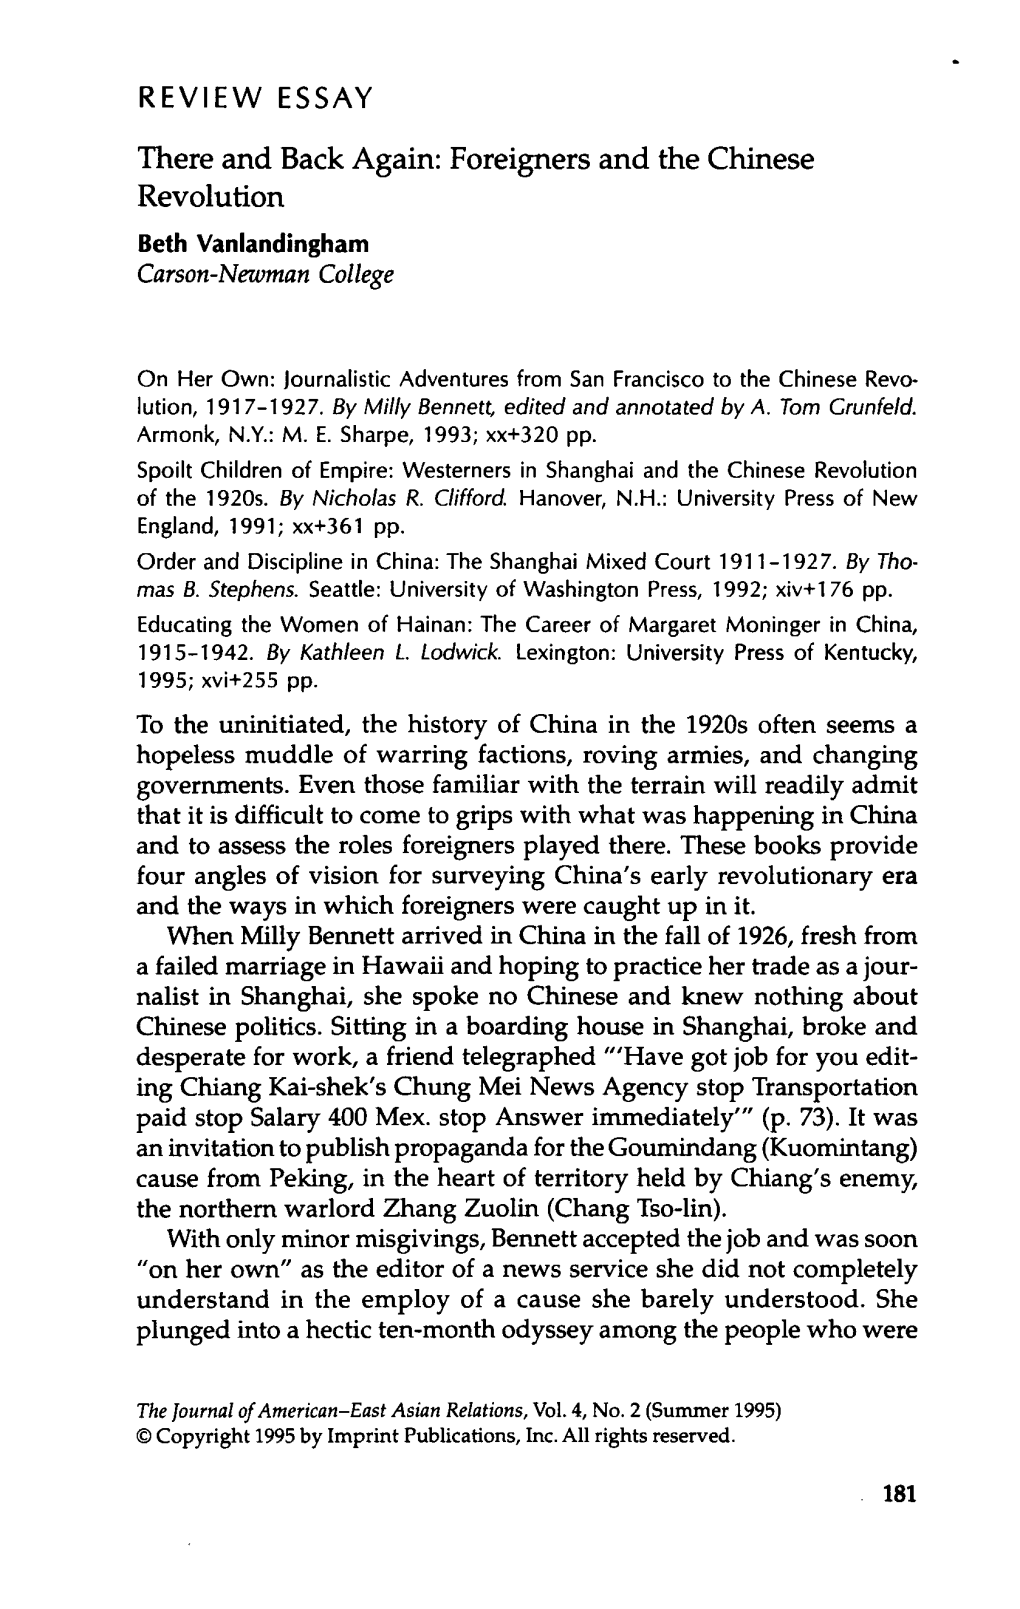 Foreigners and the Chinese Revolution Beth Vanlandingham Carson-Newman College